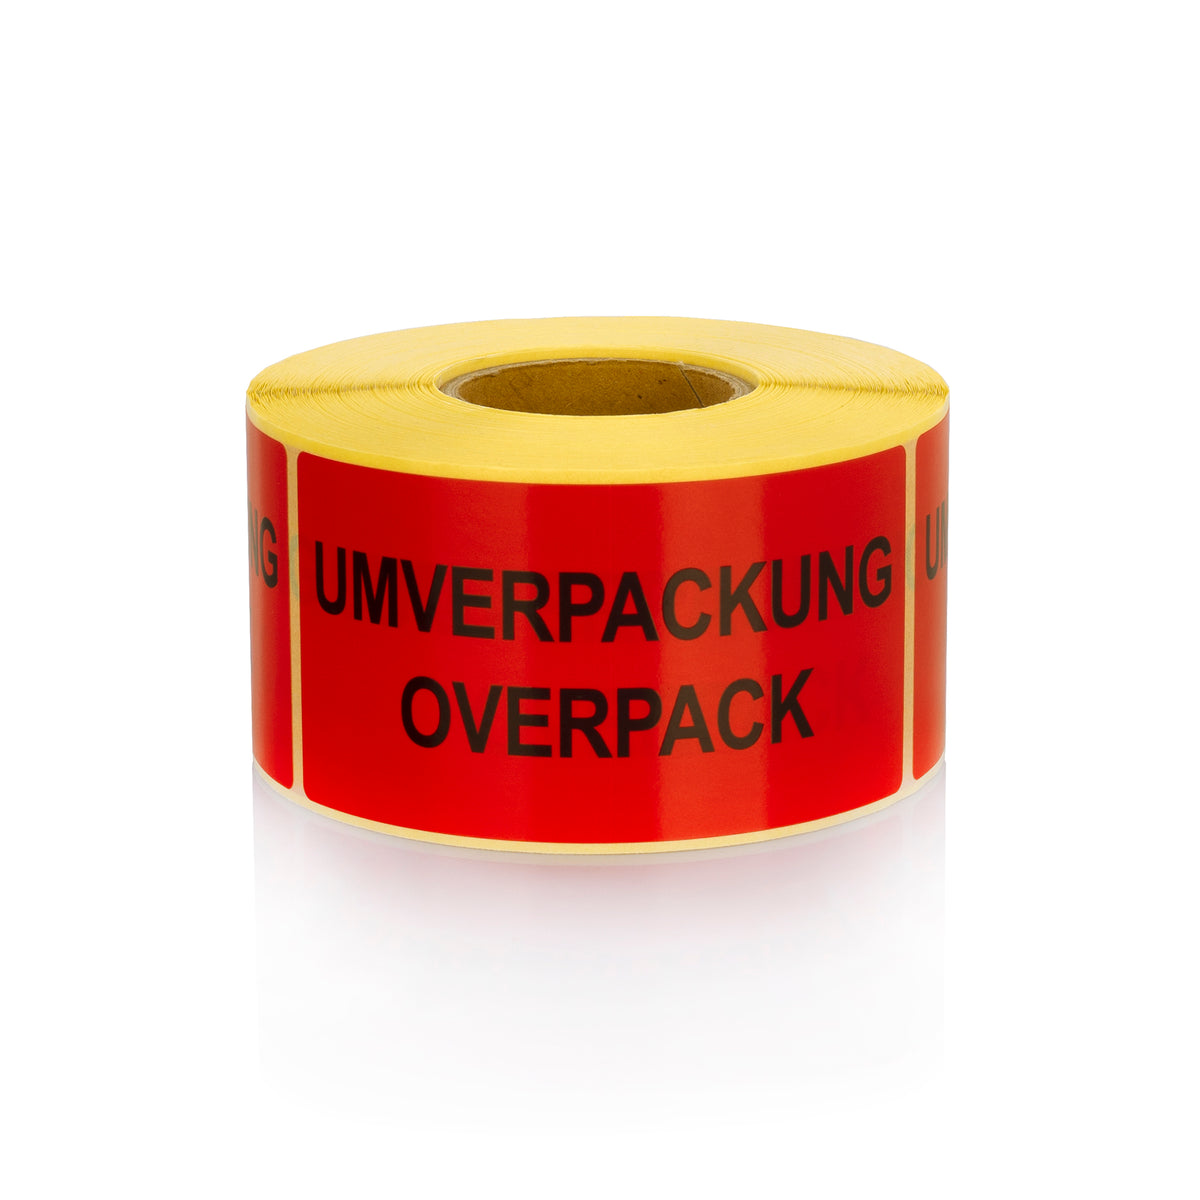 Warning Labels on Roll 100 x 50 mm Umverpackung Overpack 500 pcs